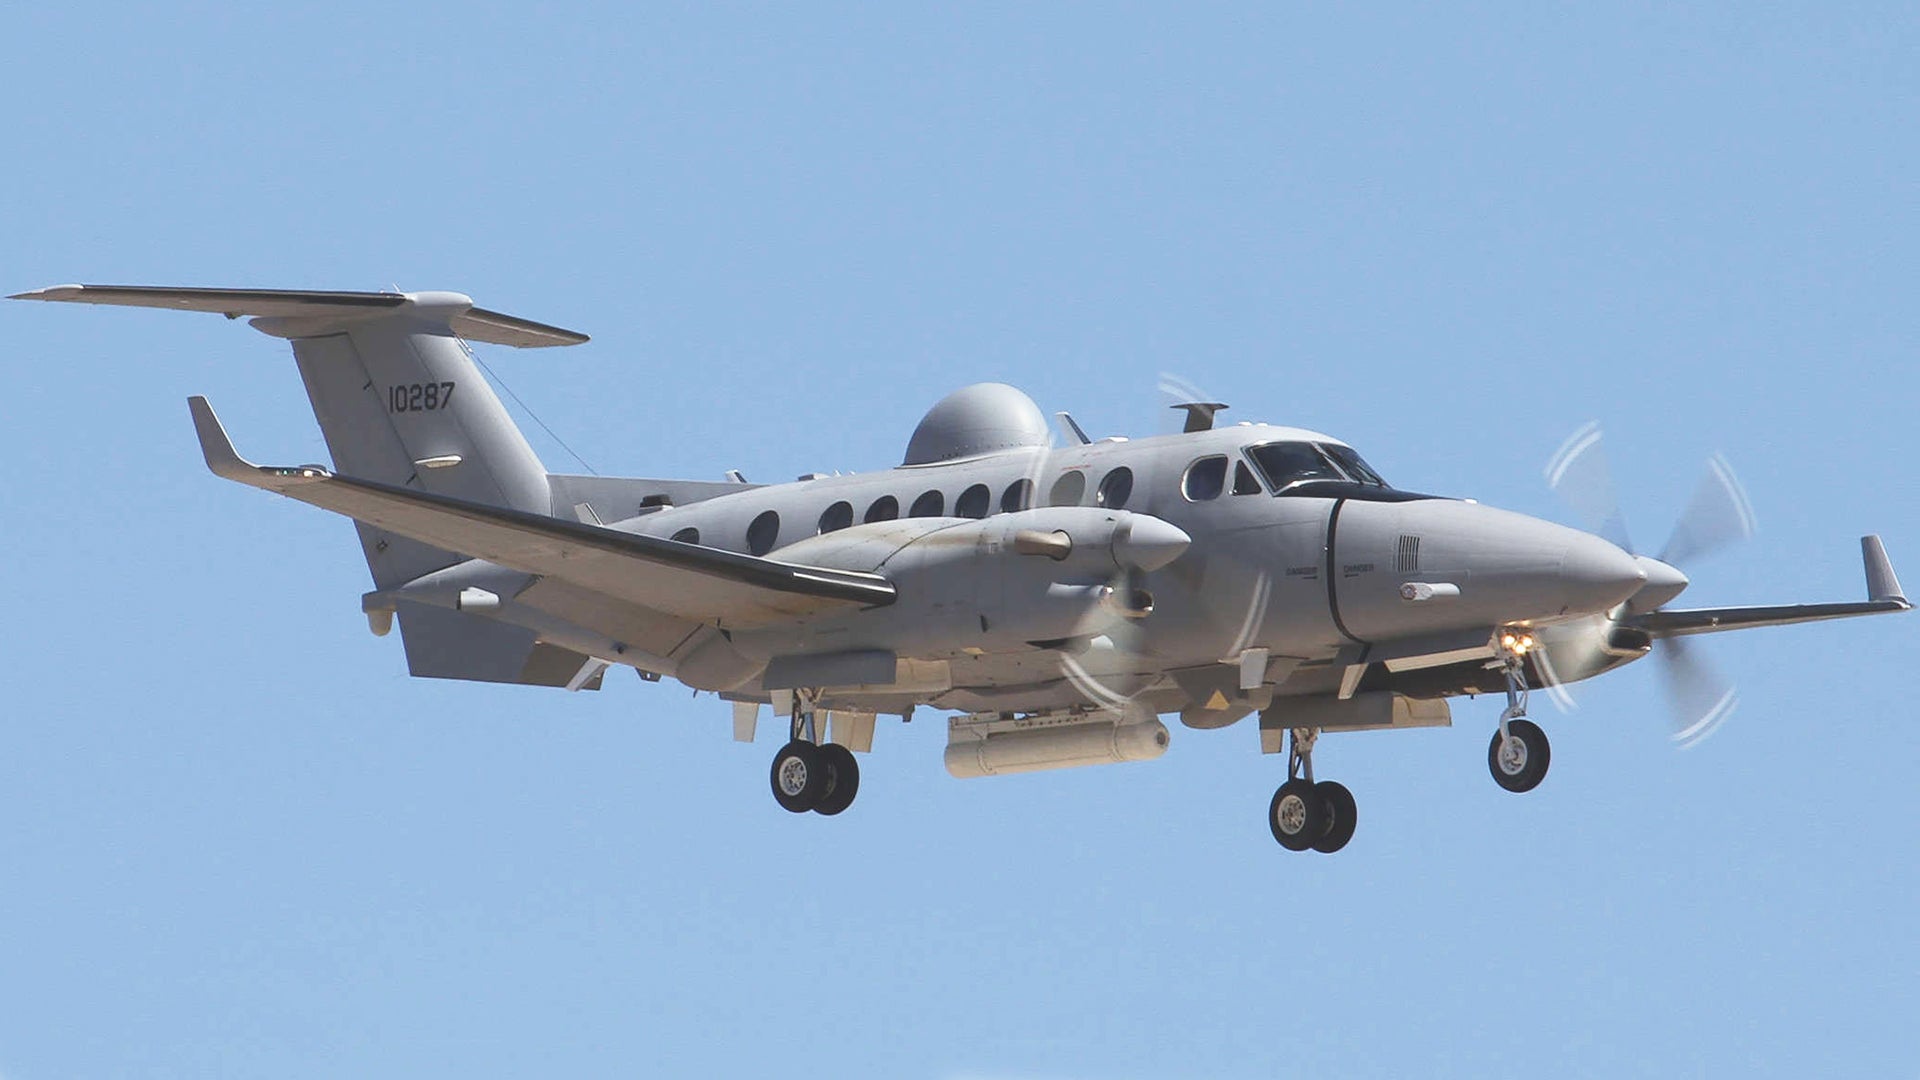 Yet Another Version of the U.S. Army’s New Spy Plane Appears in Arizona